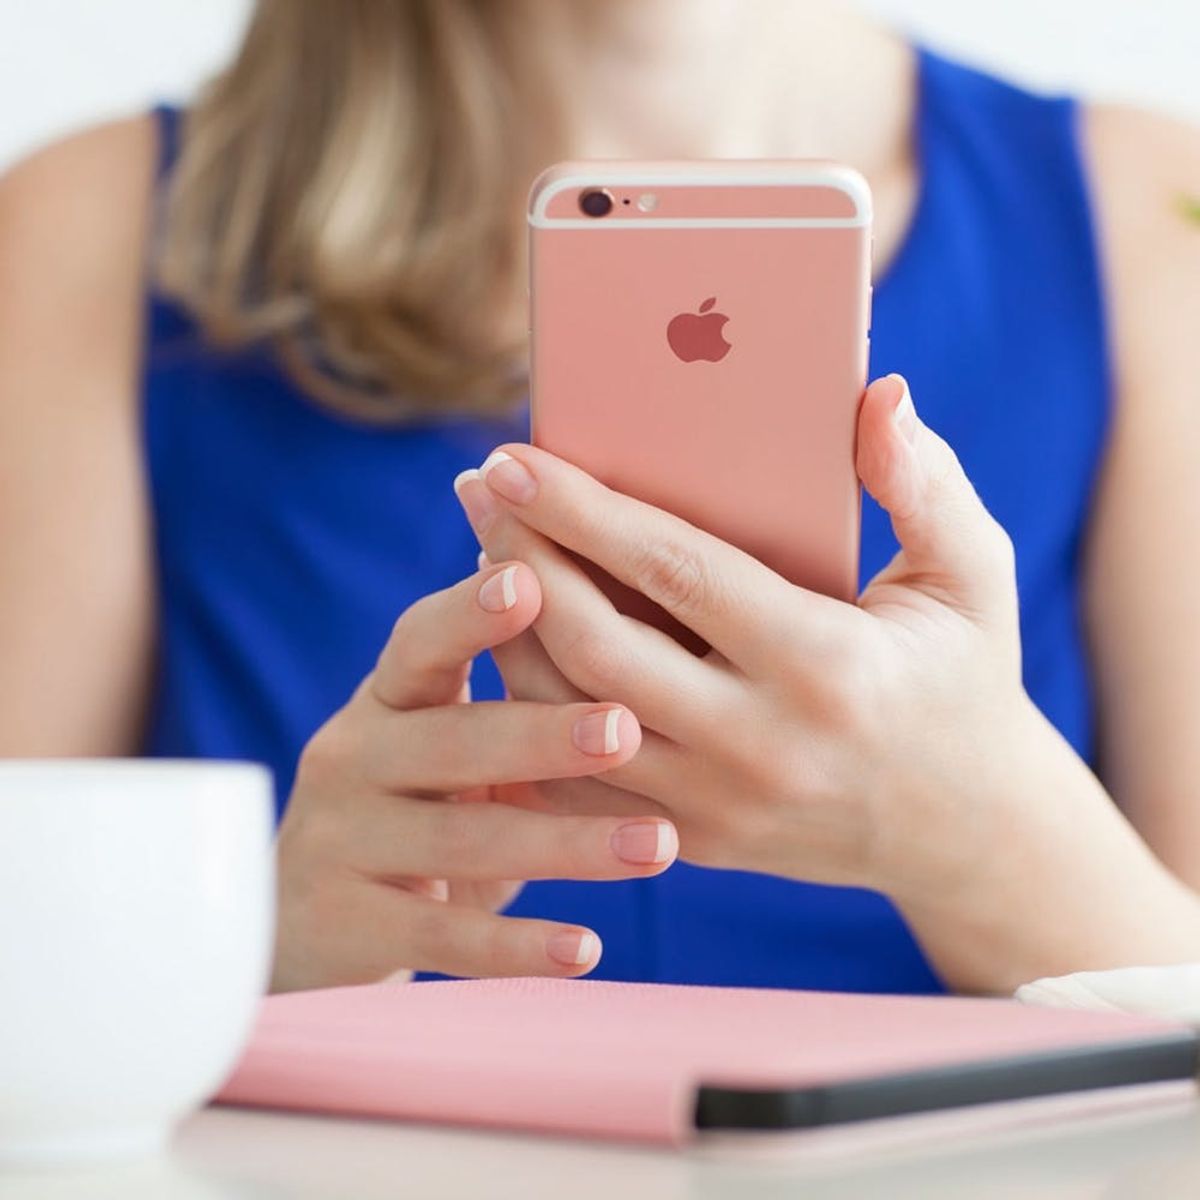 I Went an Entire Day Without Using My iPhone — Here’s What Happened